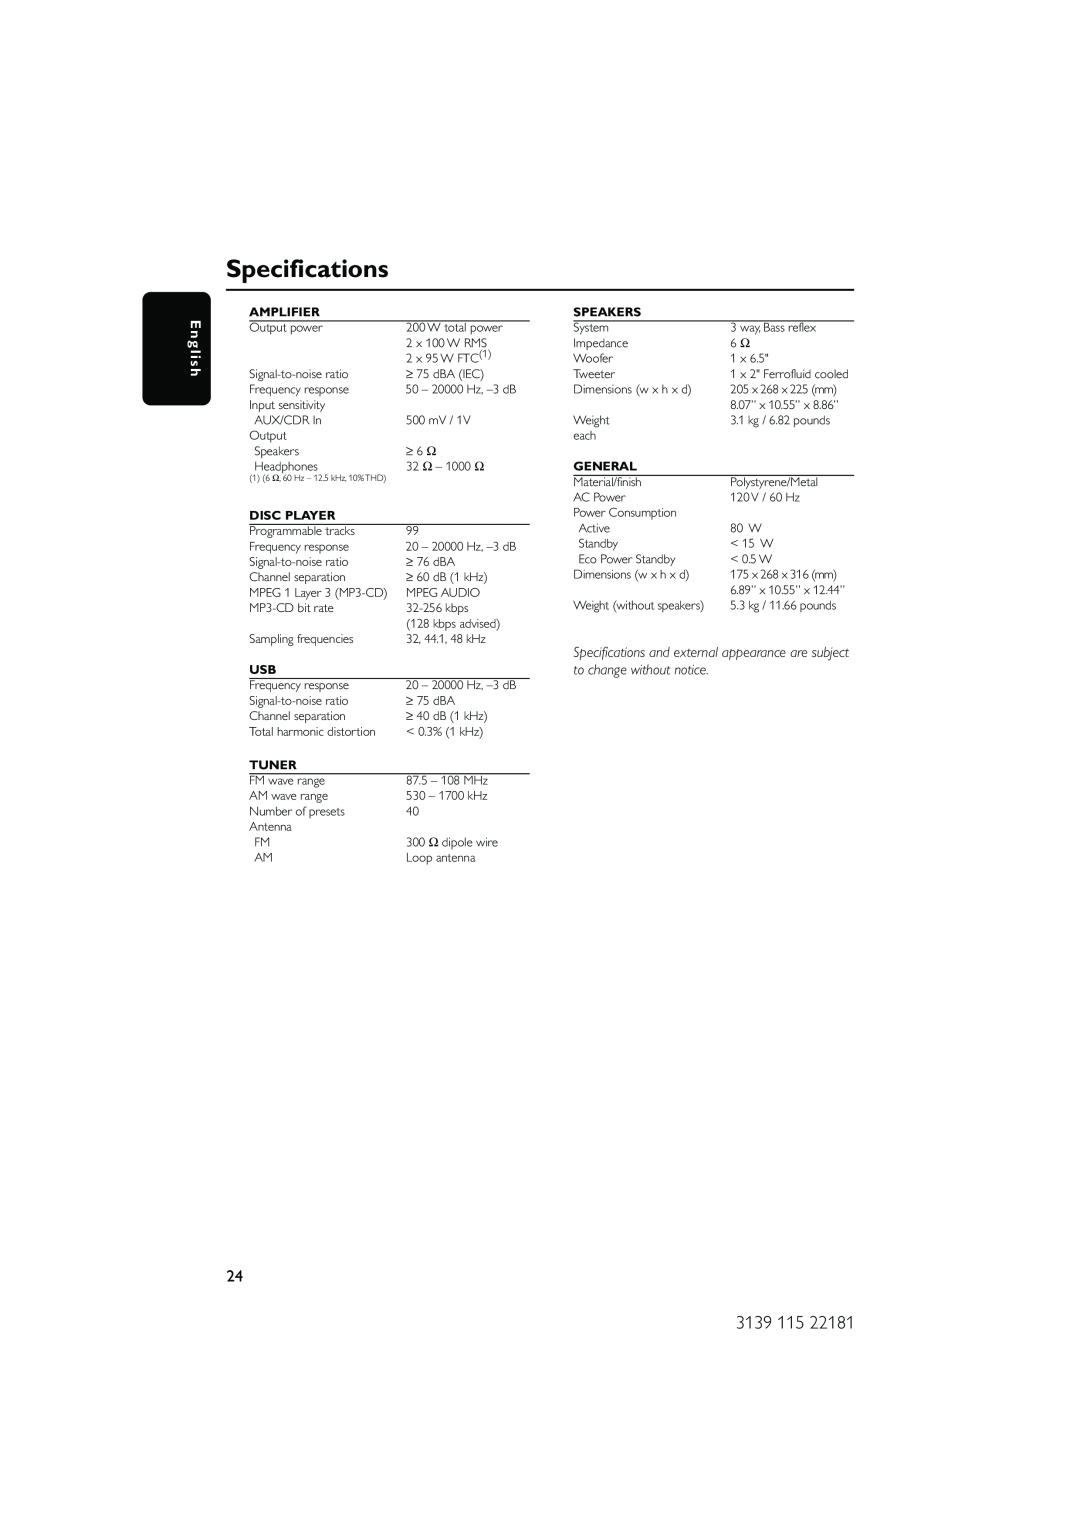 Philips MC-M570/37 warranty Specifications, E n g l i s h, to change without notice 